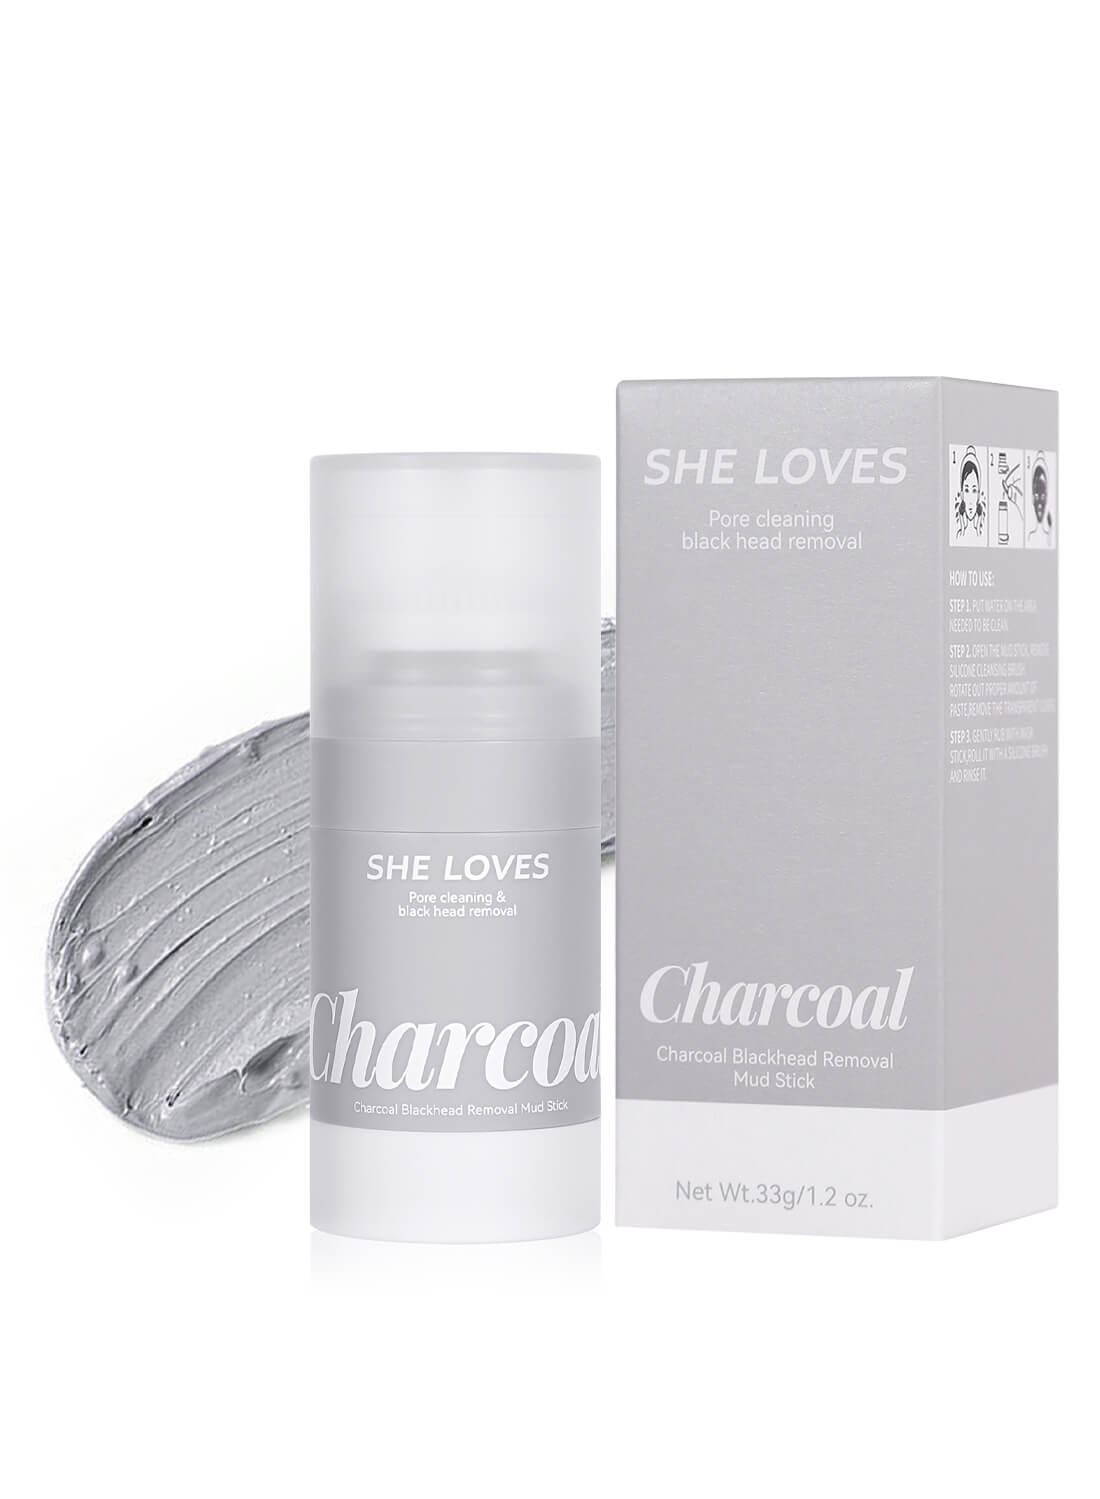 She Loves Charcoal Blackhead Removal Mud Stick 33g